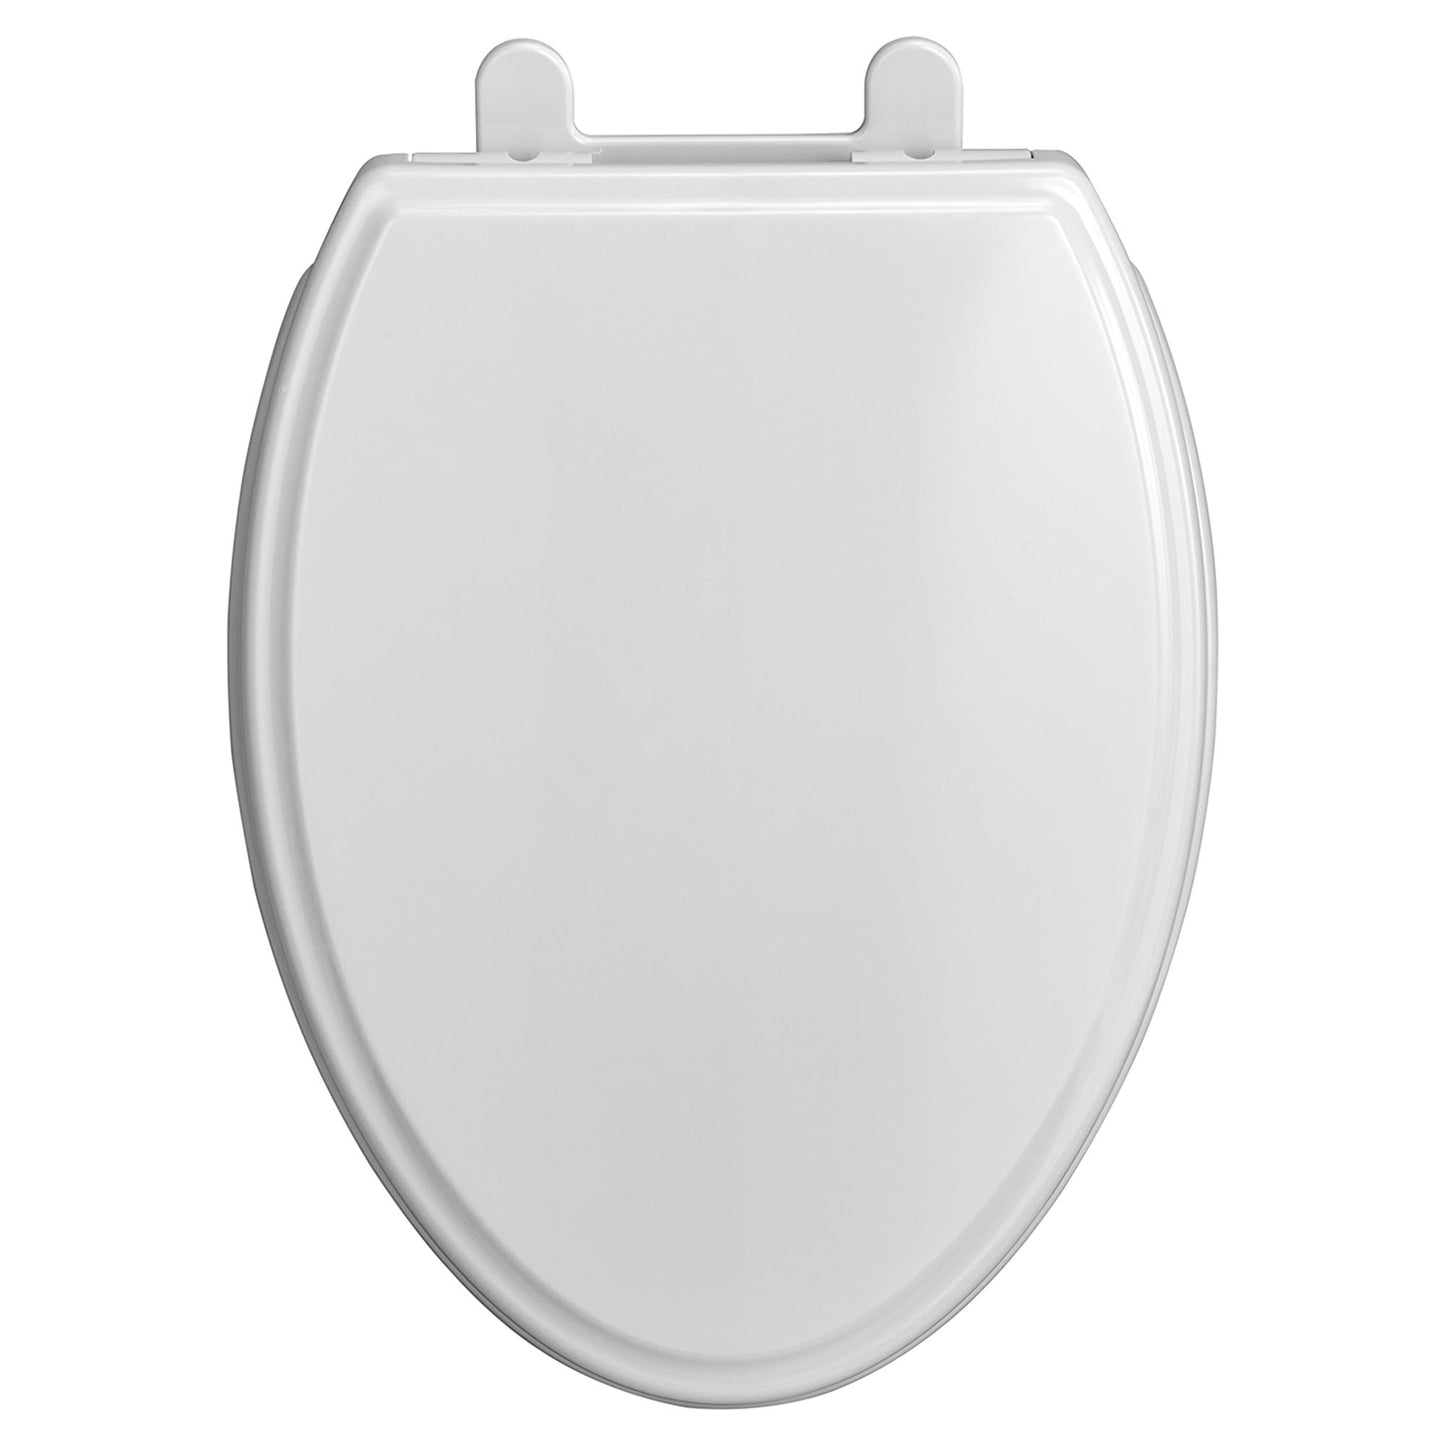 5020A65G.020 - Traditional Slow-Close Easy Lift Elongated Toilet Seat - White